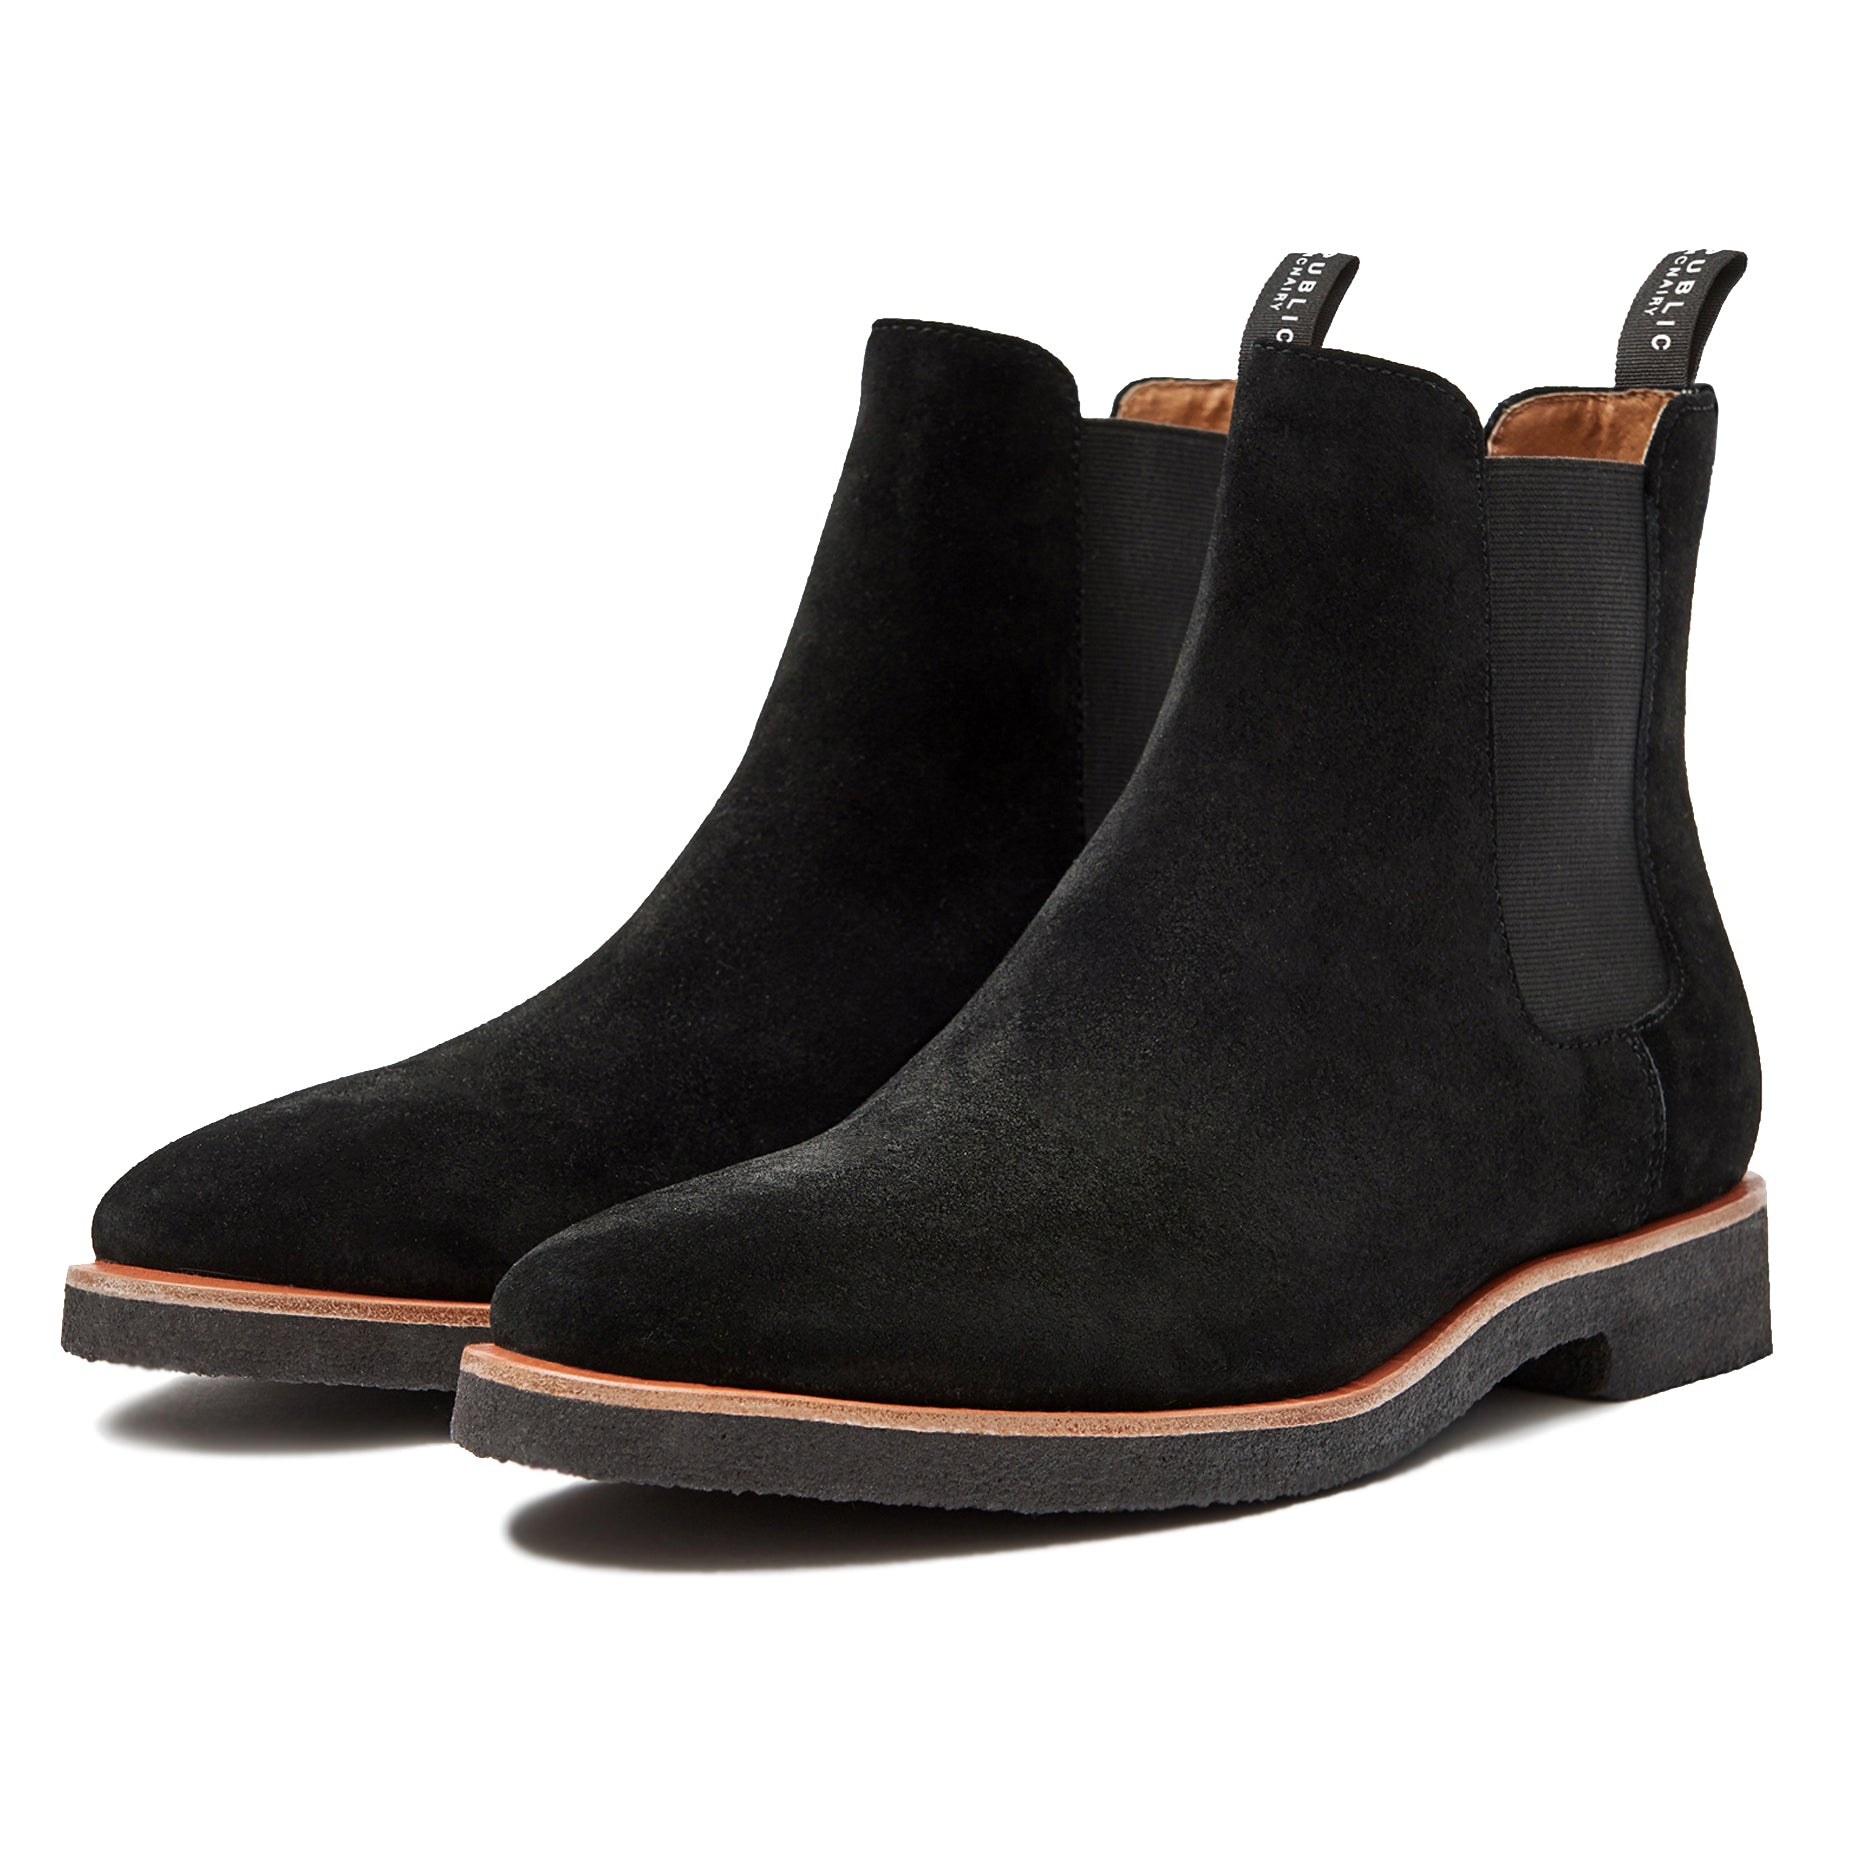 Harvey Suede Chelsea Boot | New Republic by Mark McNairy